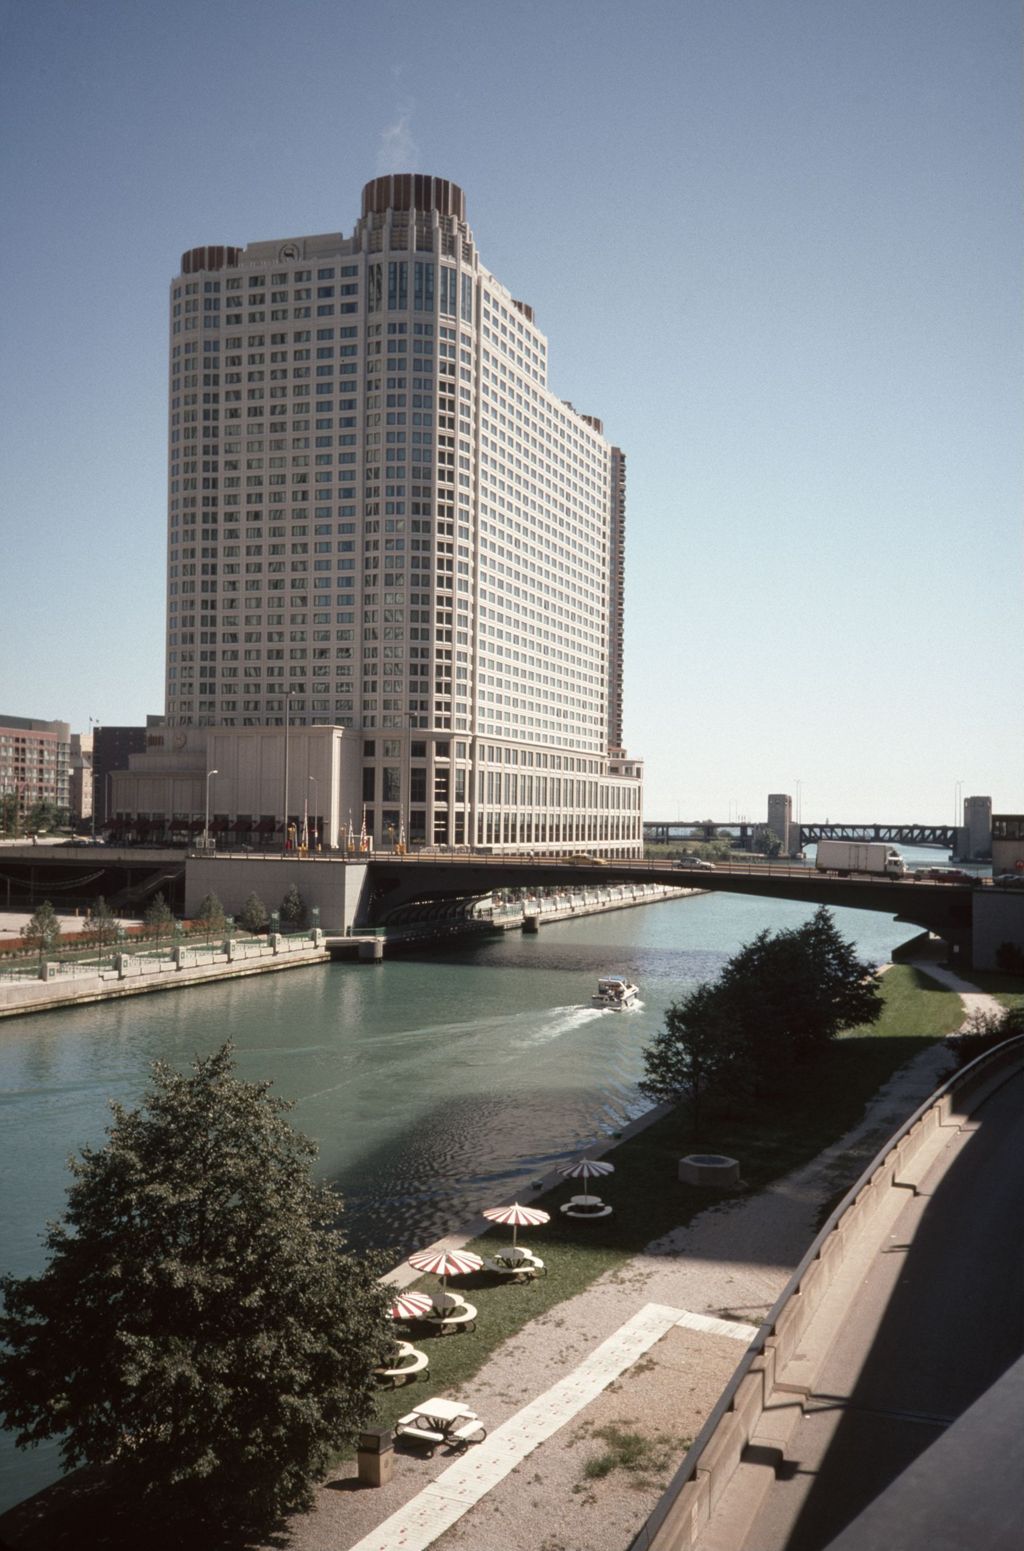 Miniature of Chicago River and Sheraton Chicago Hotel